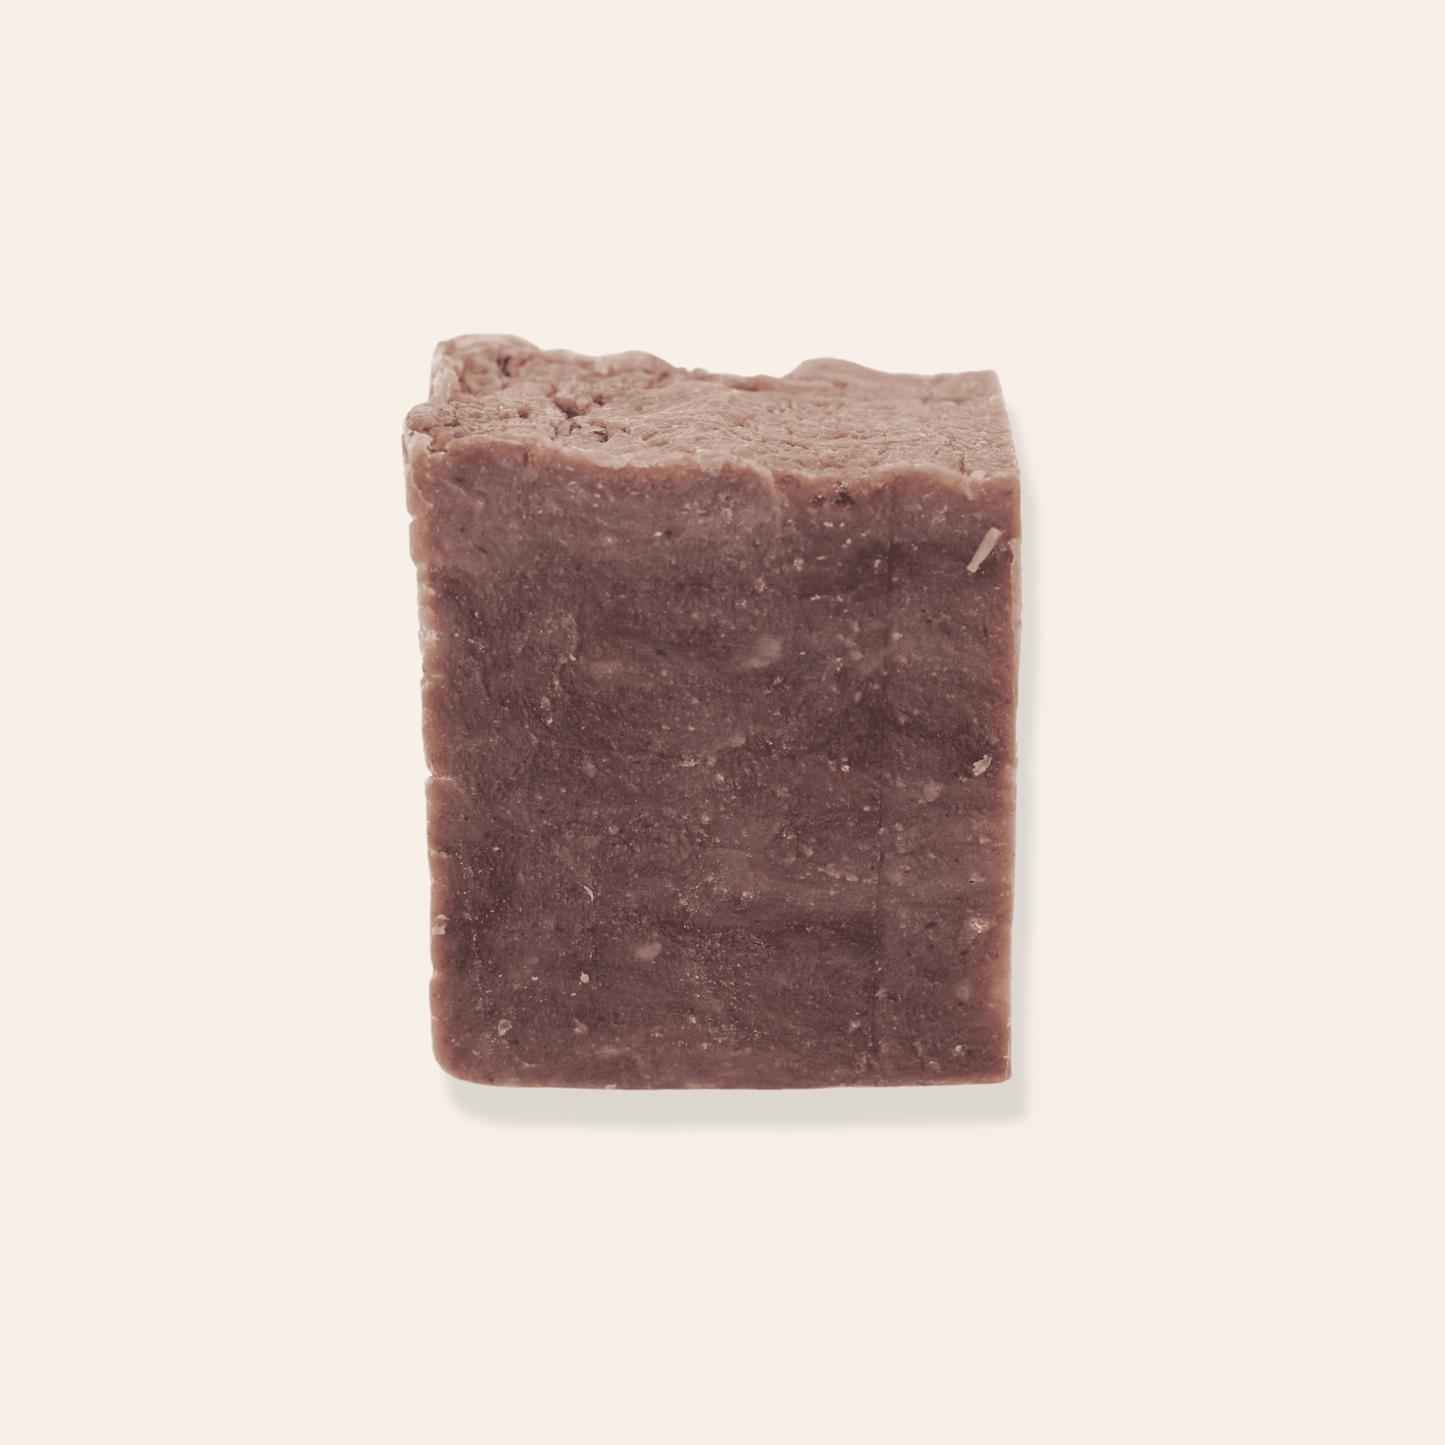 A bar of brown natural coconut milk soap on a cream background.